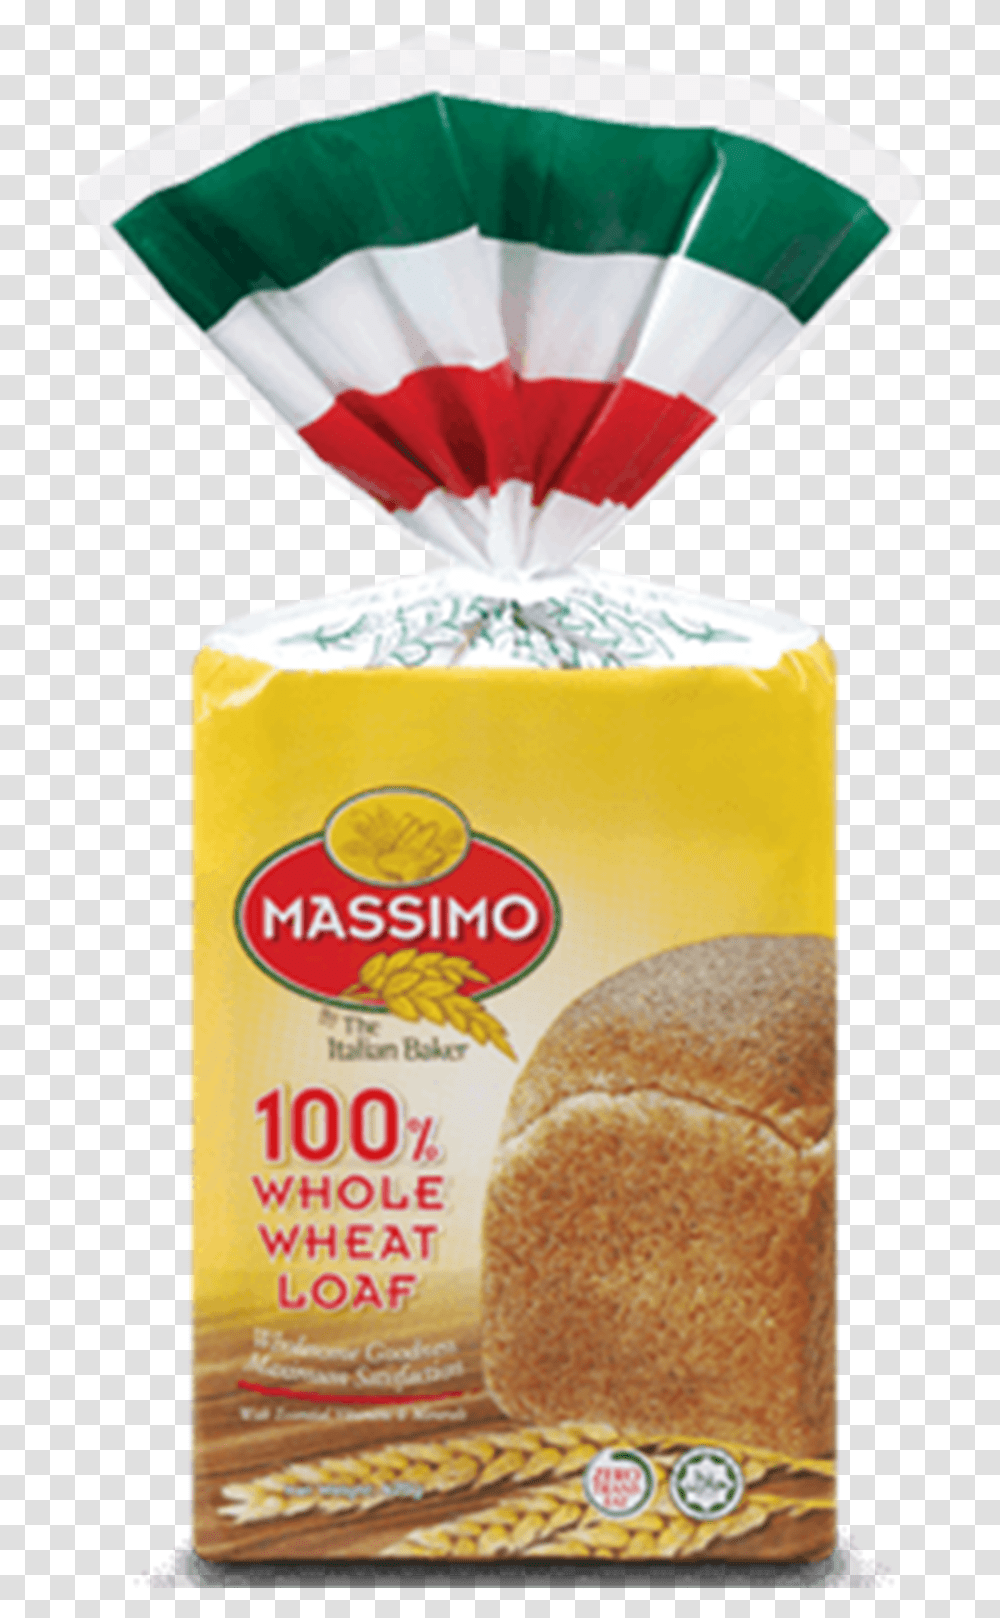 Whole Wheat Bread Massimo, Food, Birthday Cake, Dessert, Bread Loaf Transparent Png